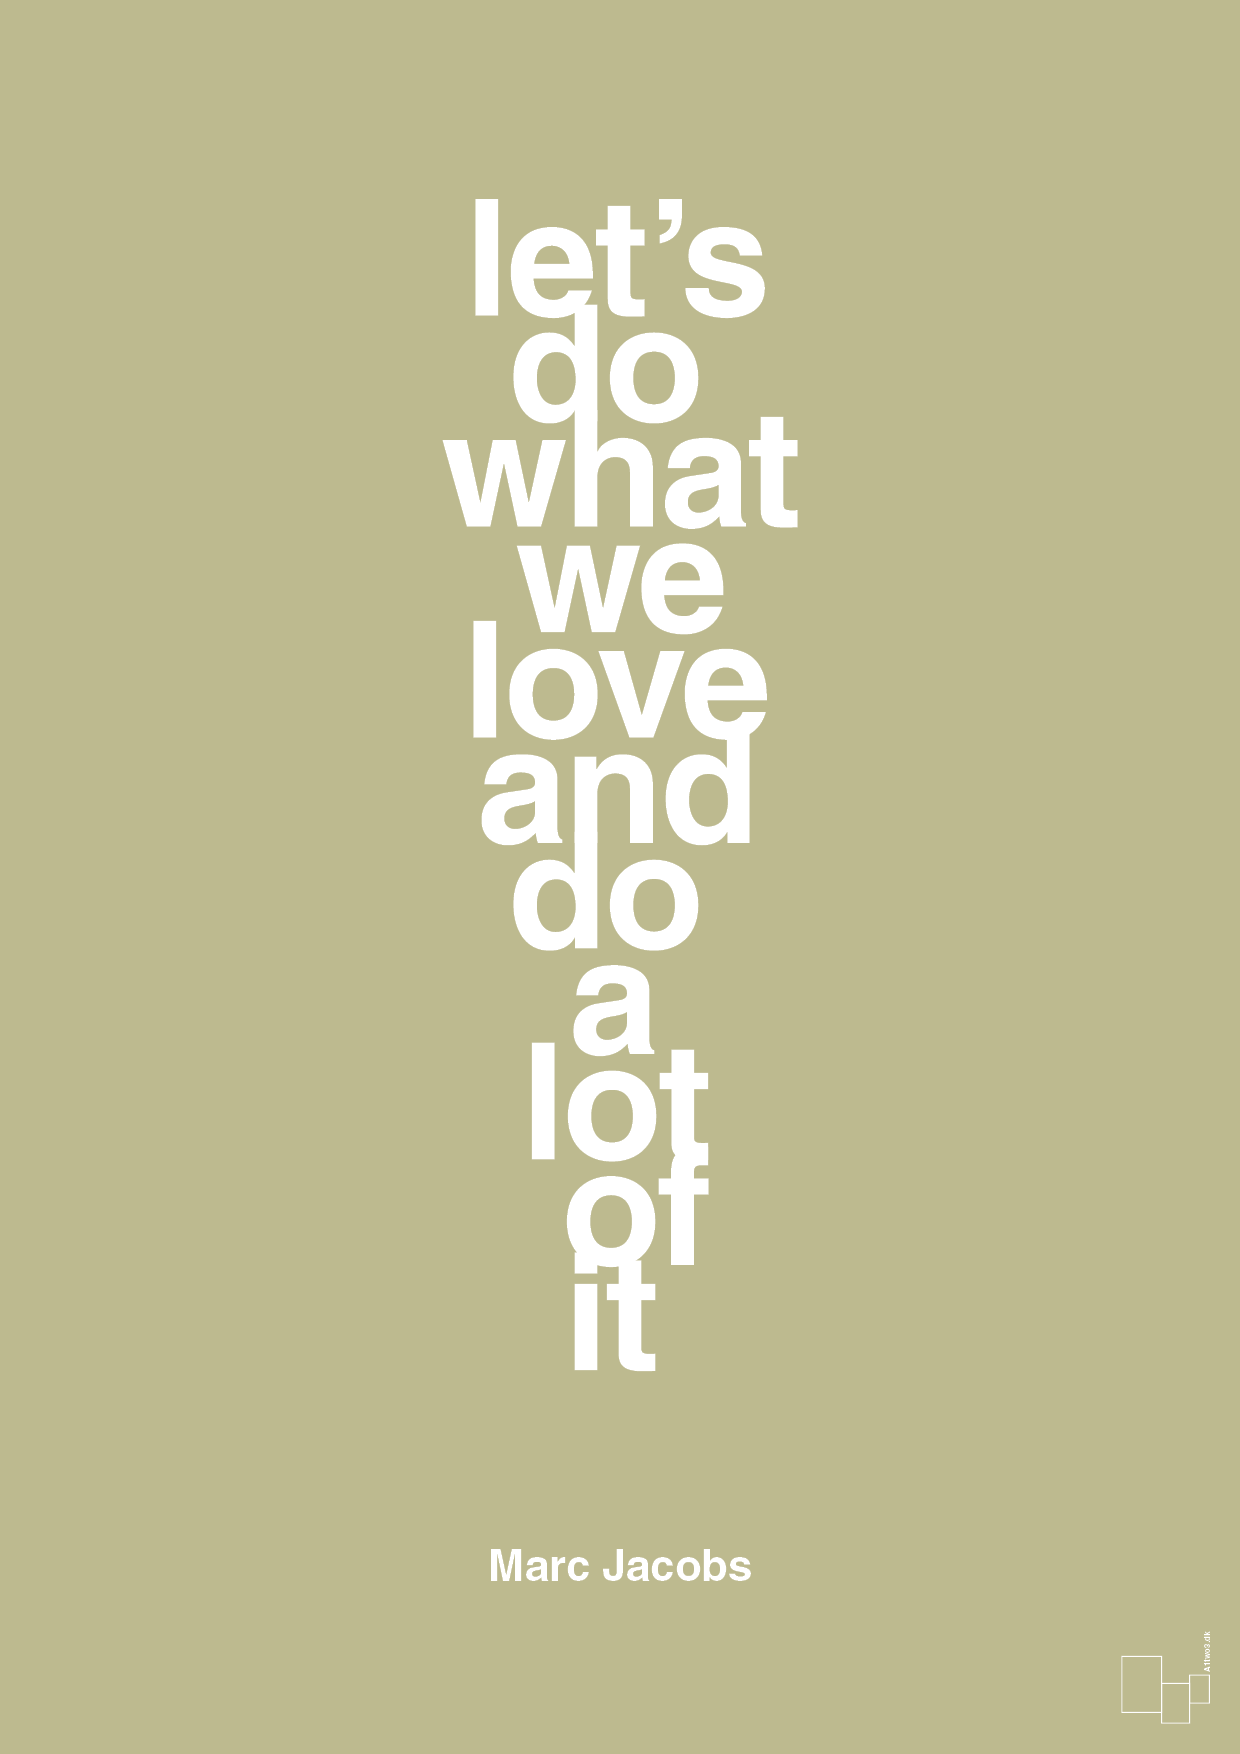 lets do what we love and do a lot of it - Plakat med Citater i Back to Nature